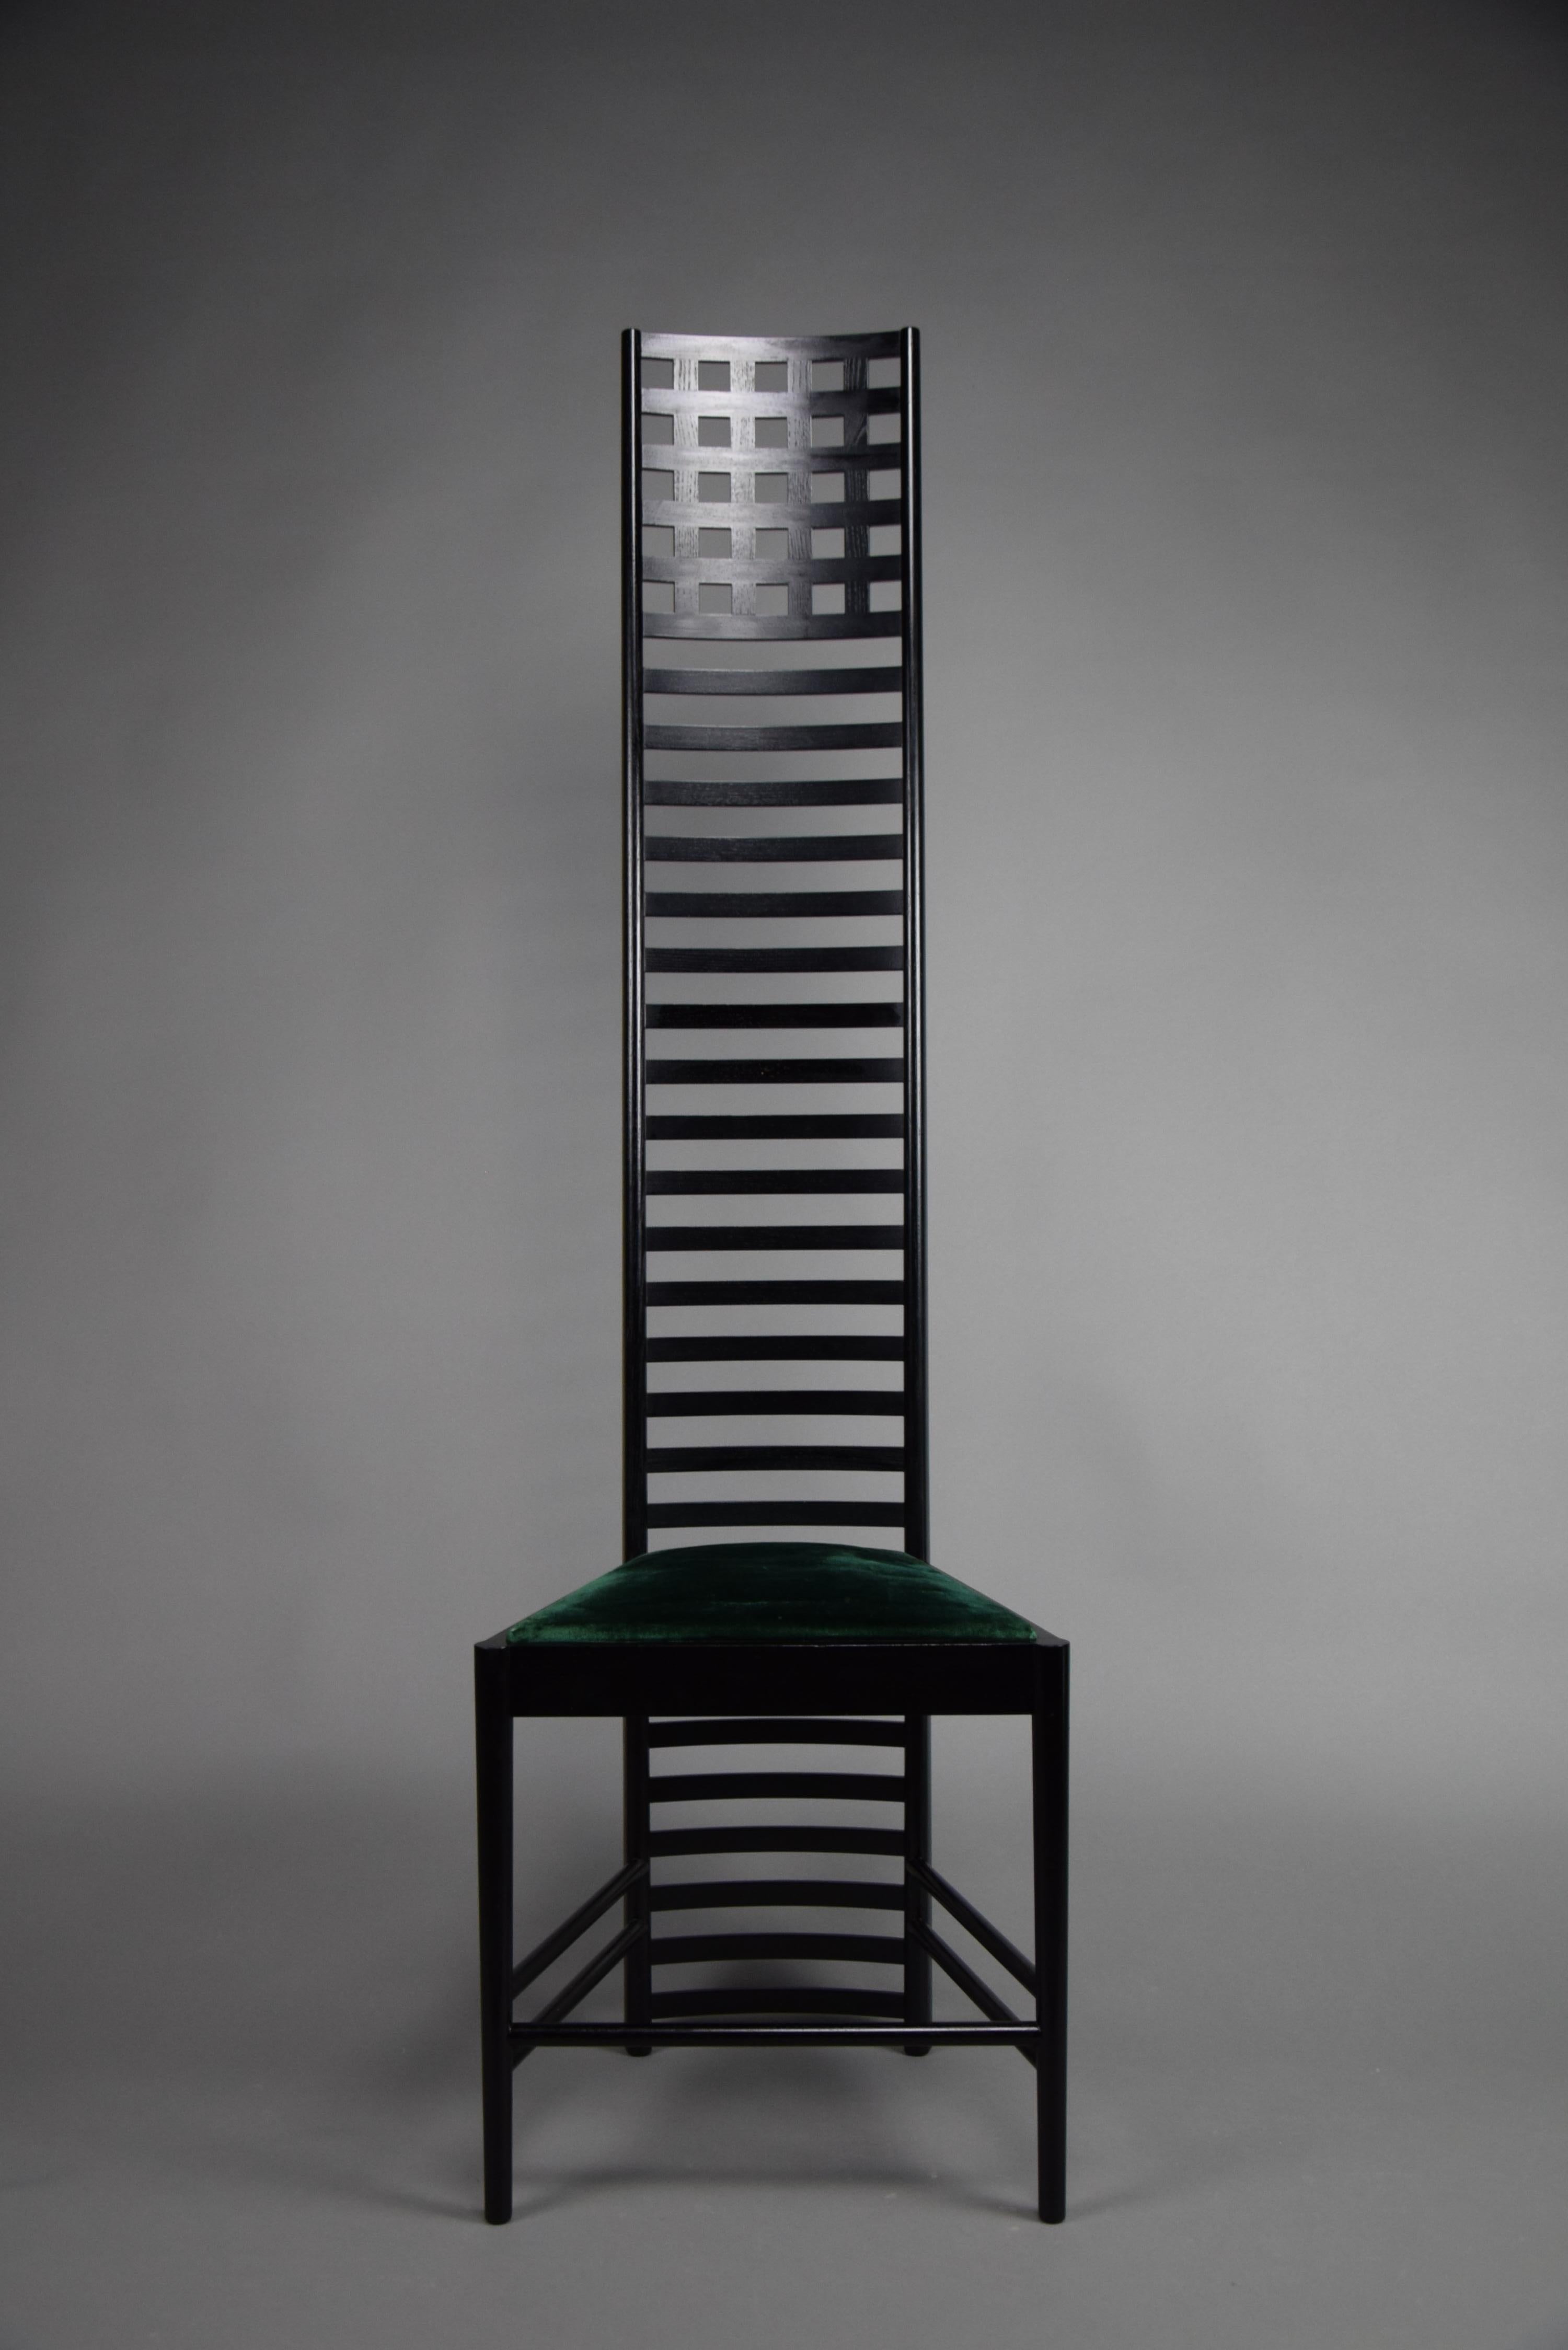 Late 20th Century Hill House Chair Early Edition by Charles Rennie Mackintosh for Cassina Italy